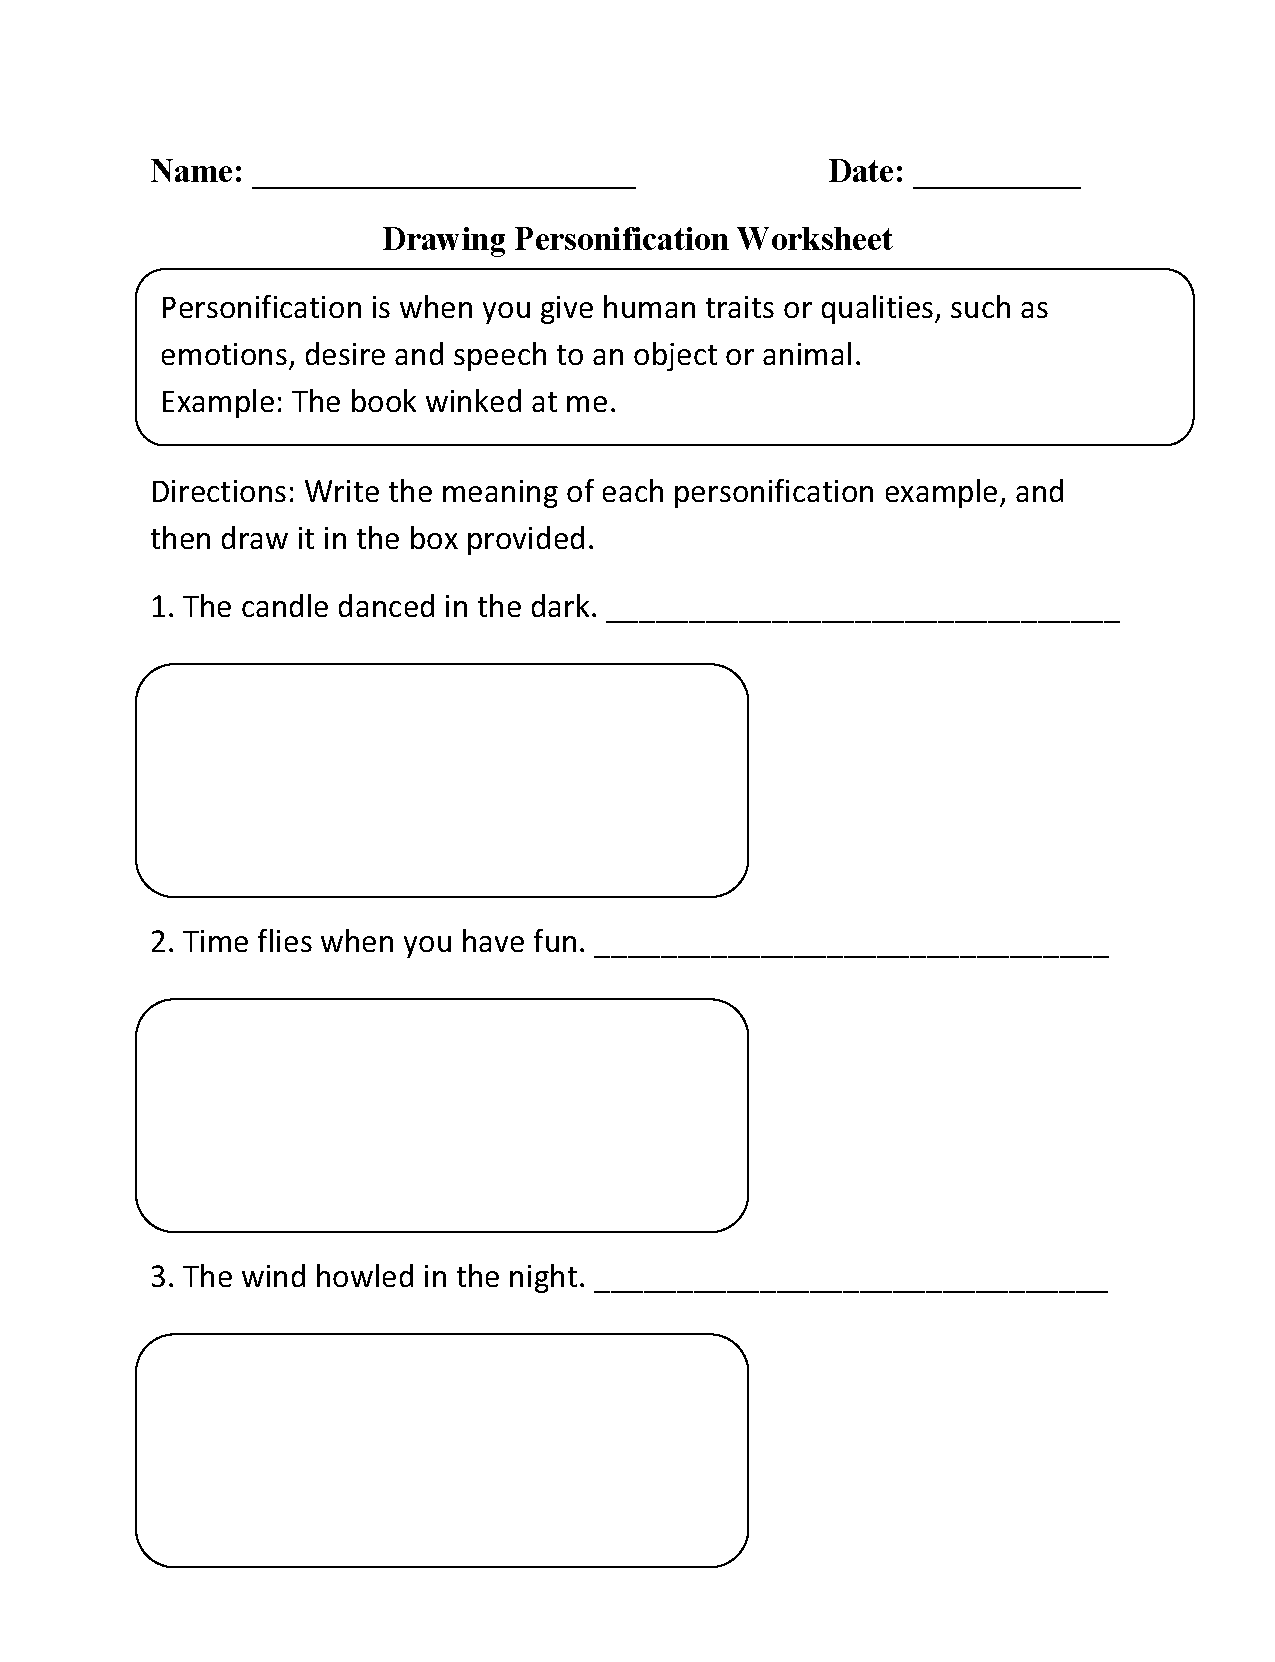 Personification Worksheets 4th Grade Image